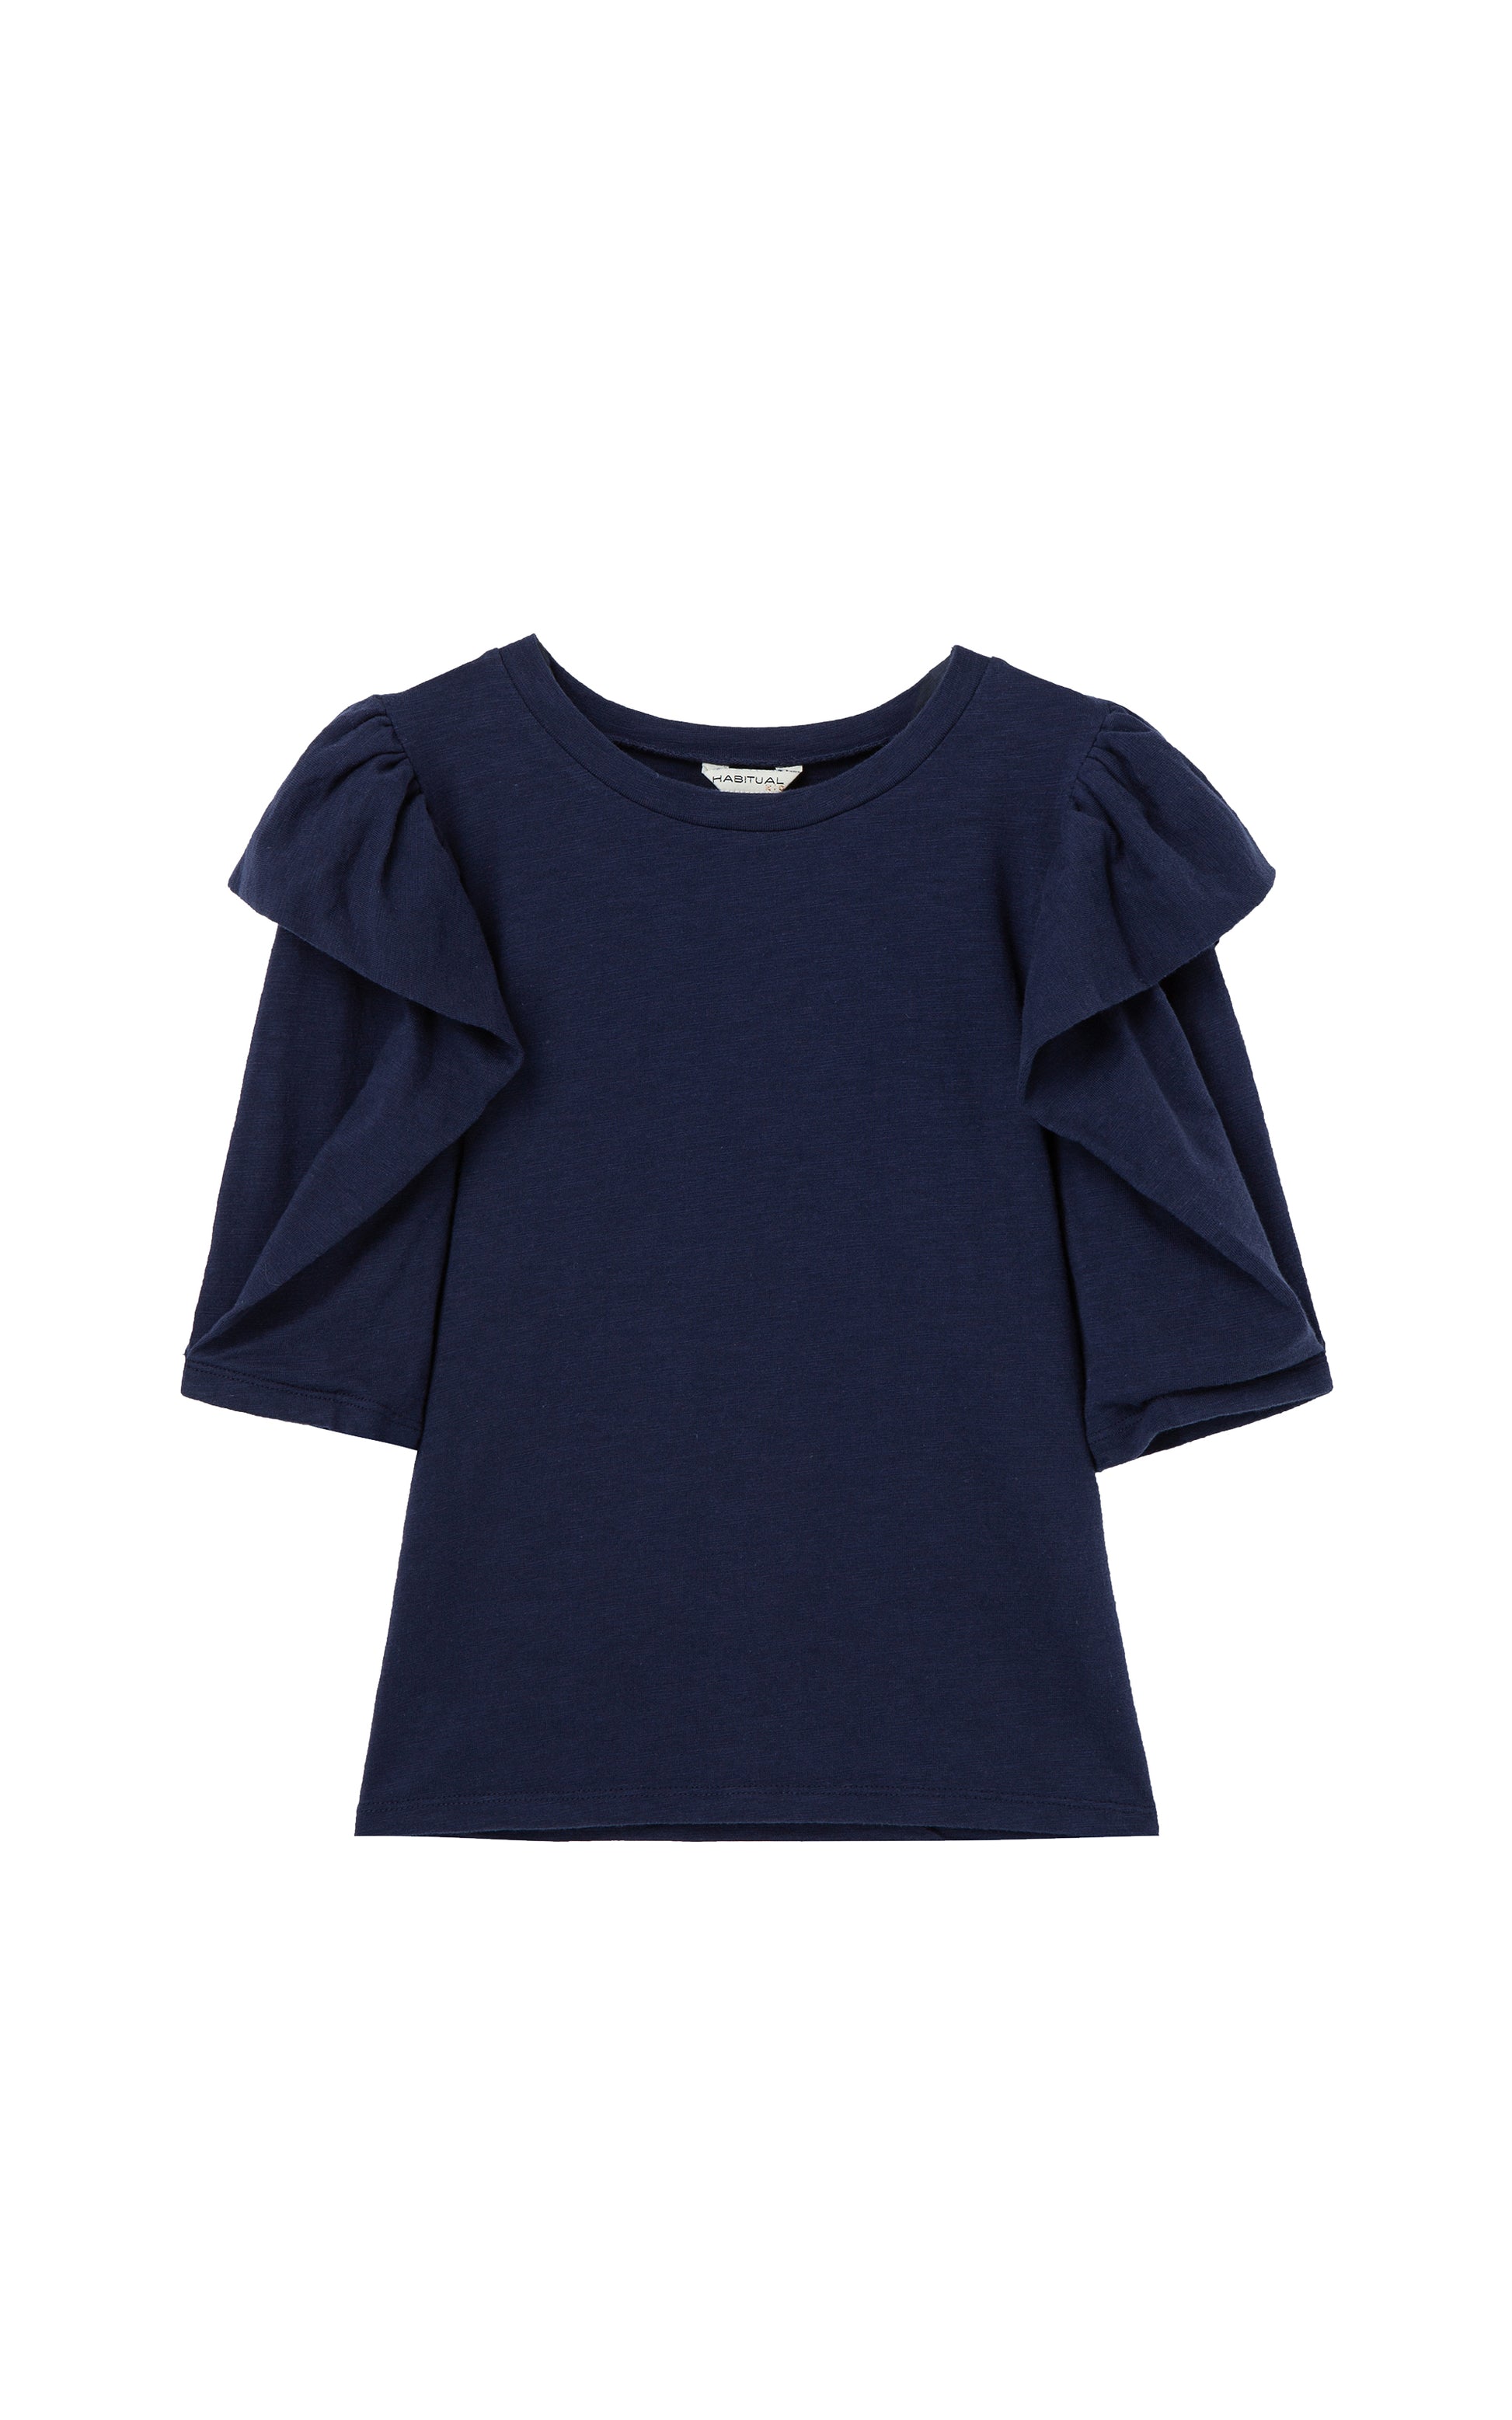 Front View Navy blue Top with Large sleeve ruffle 